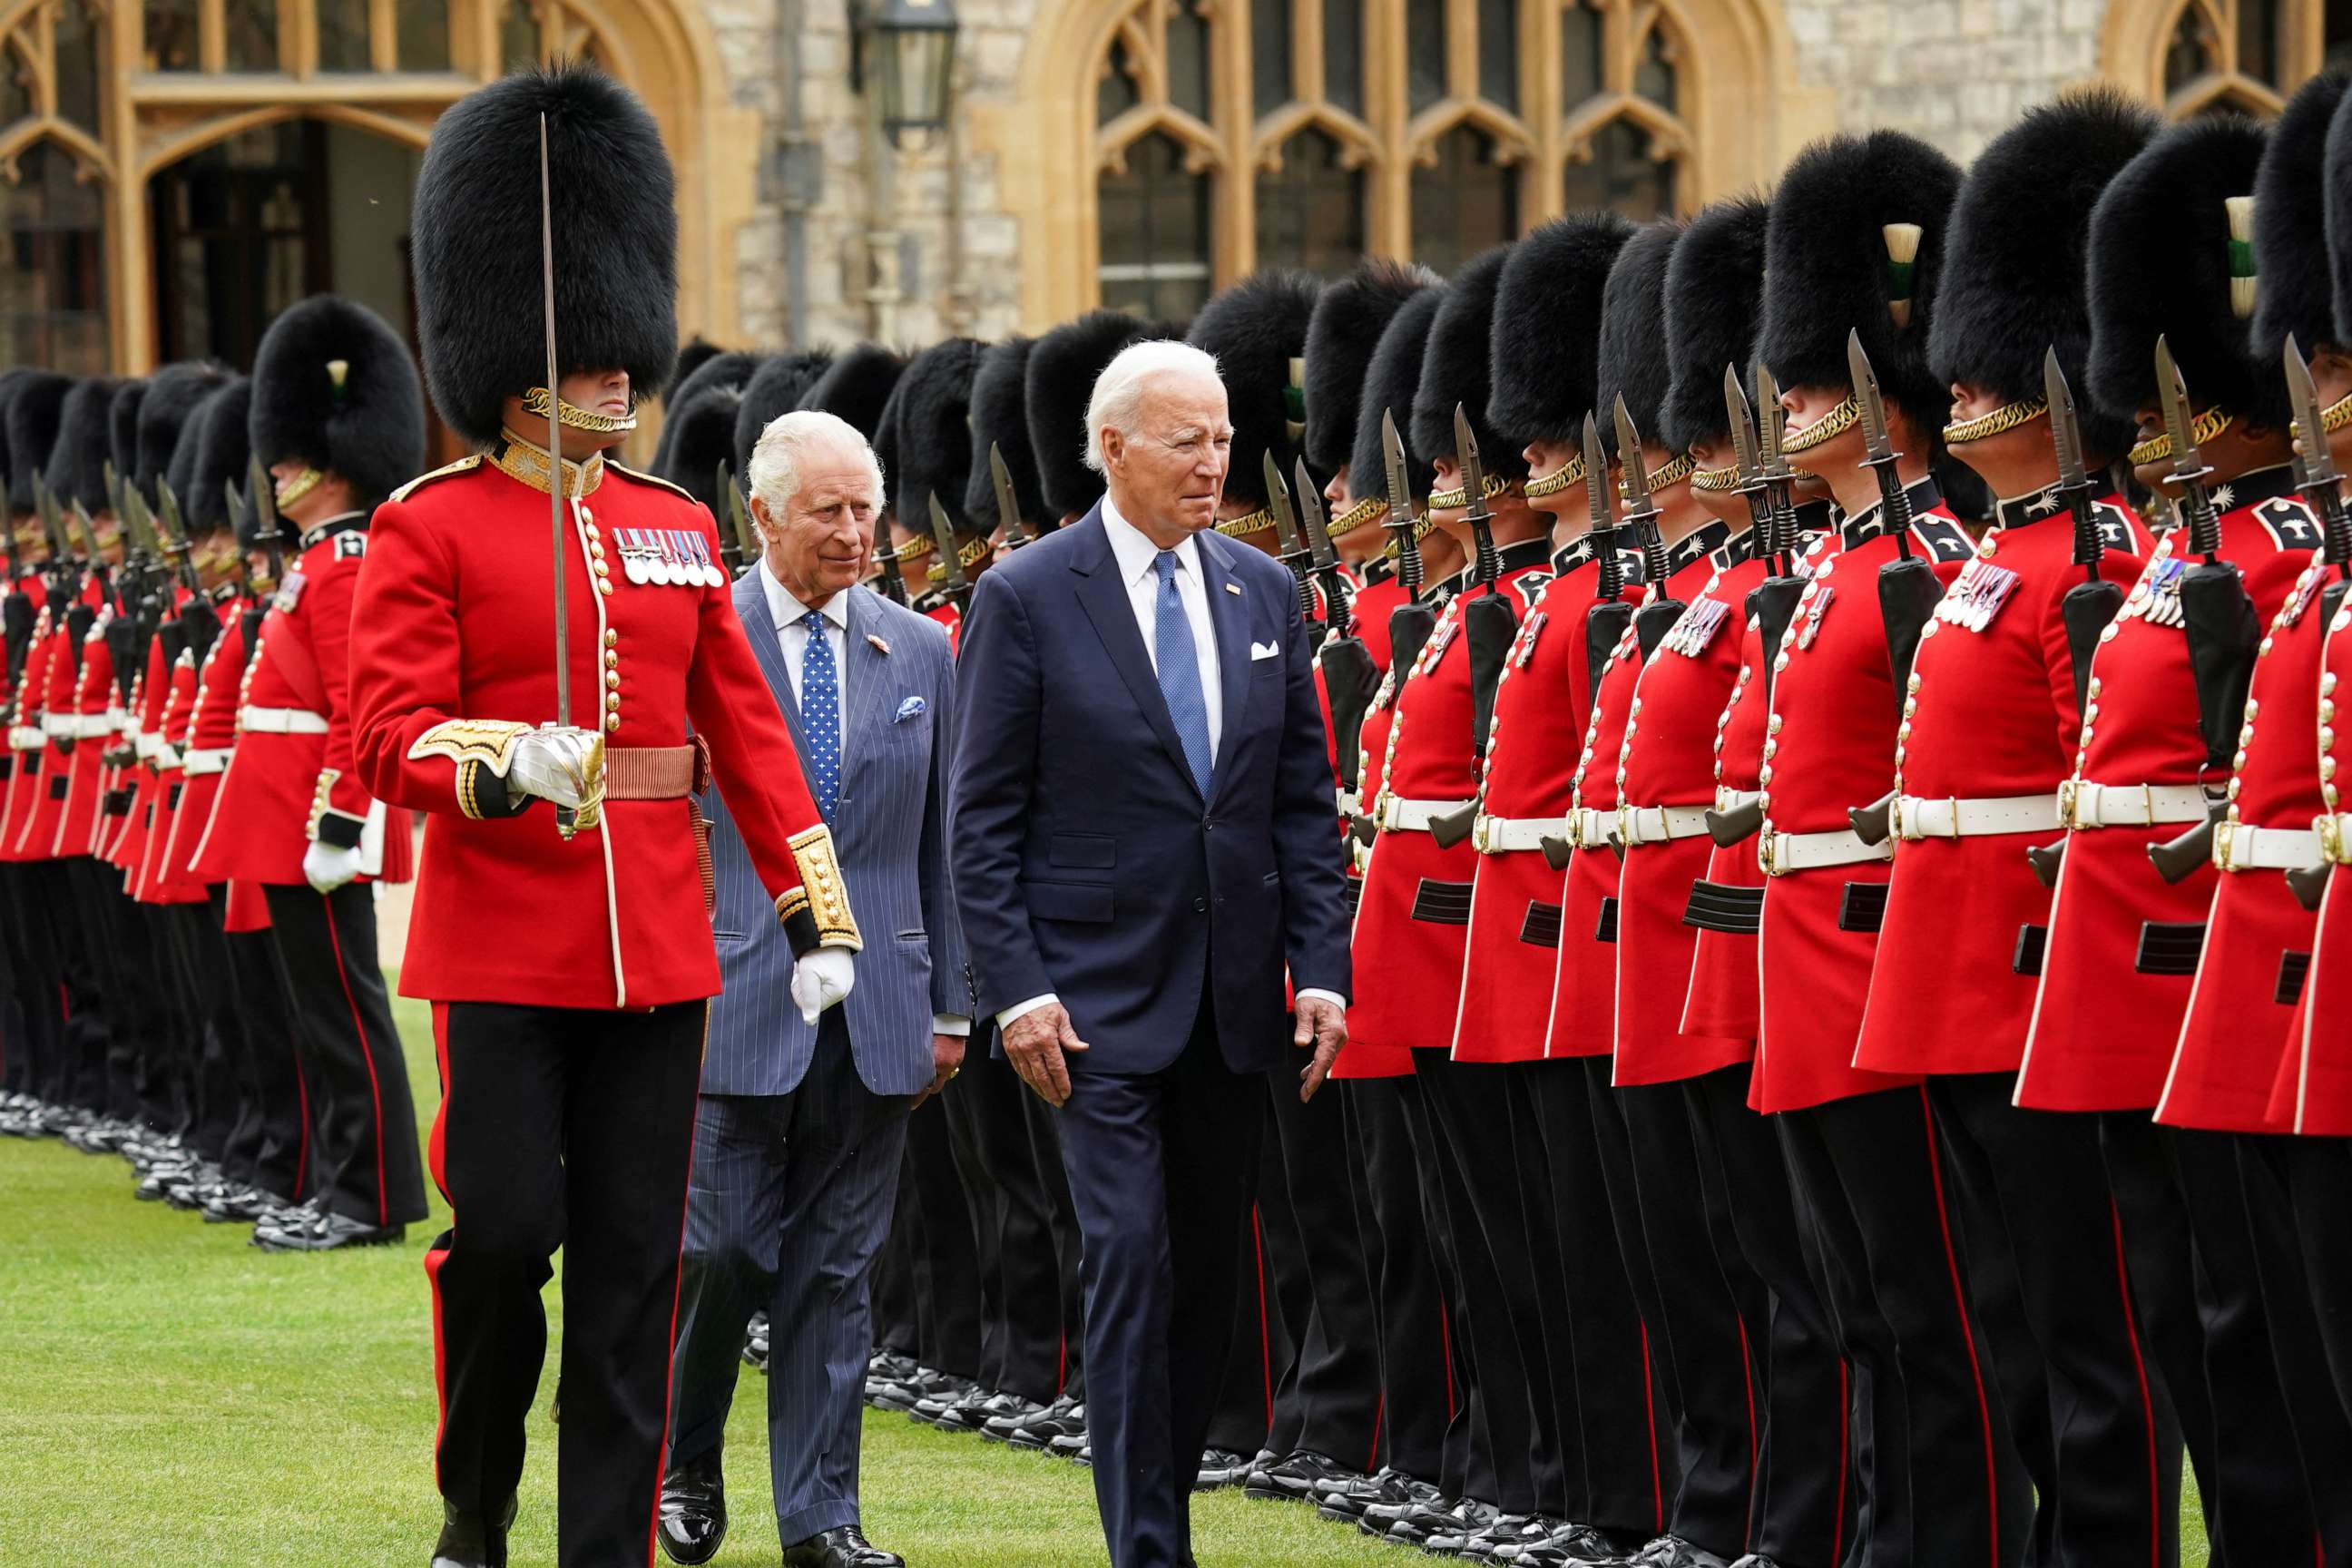 PHOTO: President Joe Biden participates in a ceremonial arrival and inspection of the honor guard with Britain's King Charles at Windsor Castle in Windsor, Britain, July 10, 2023.